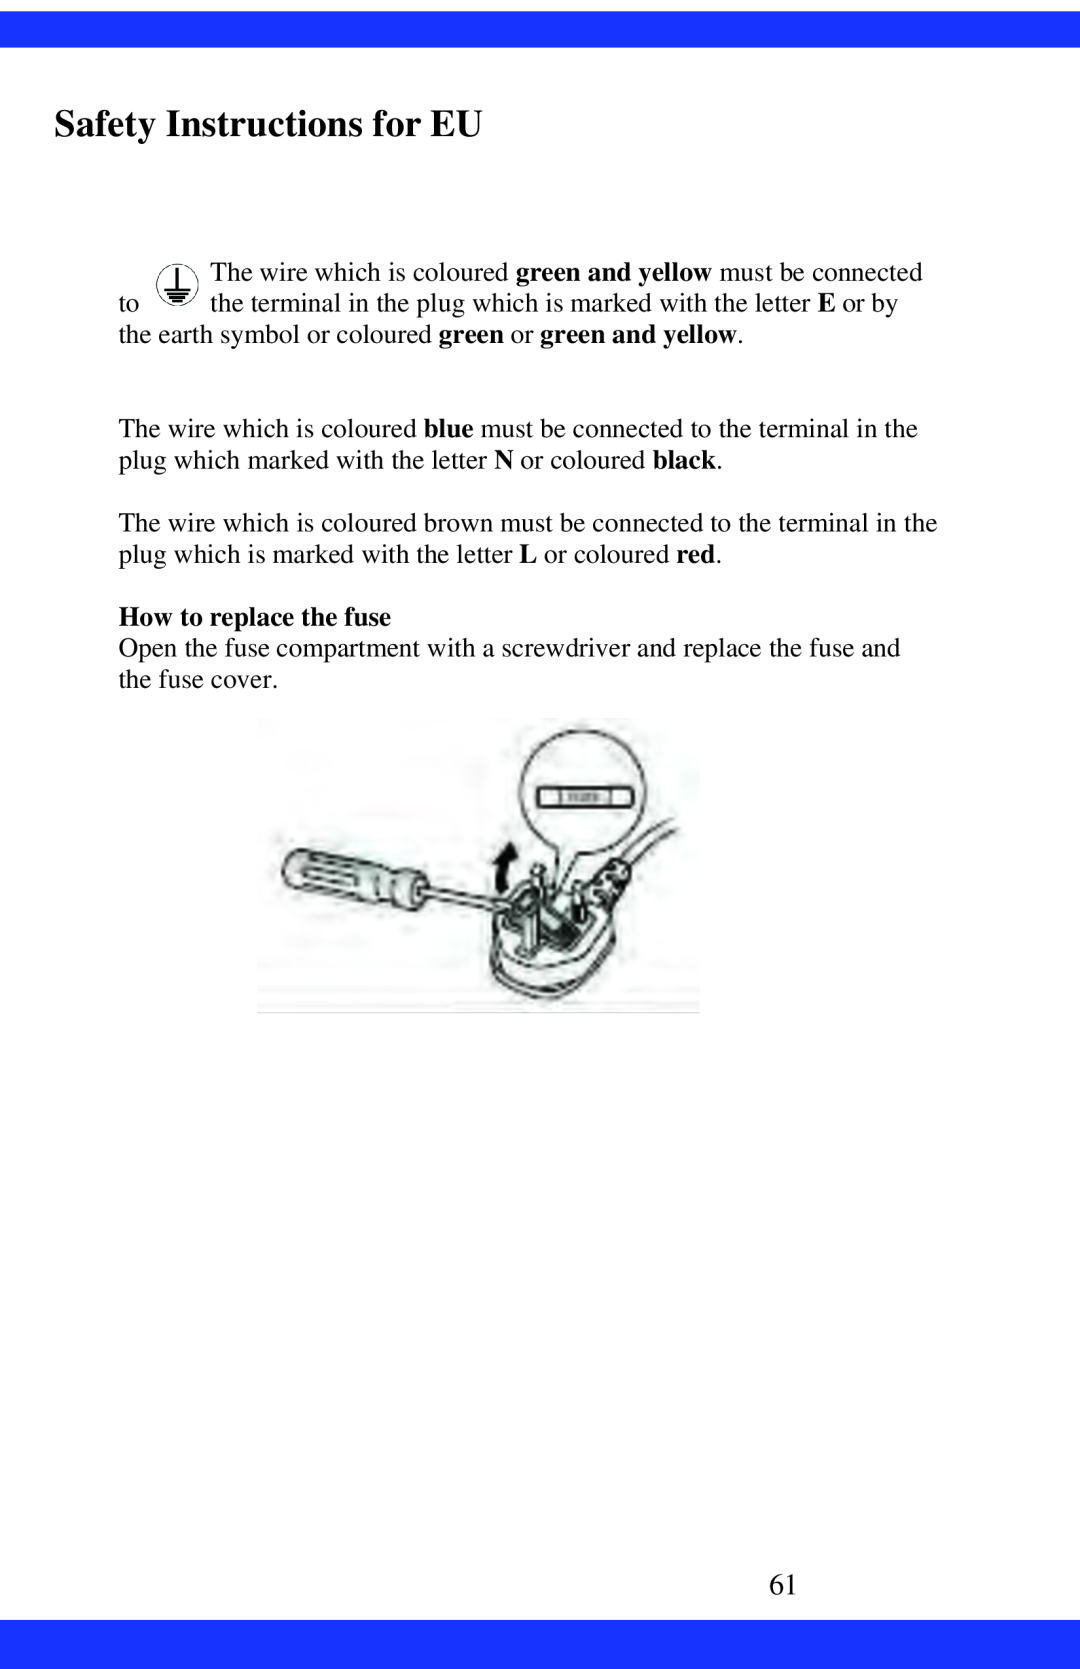 Dukane CAE-20W instruction manual Safety Instructions for EU, How to replace the fuse 